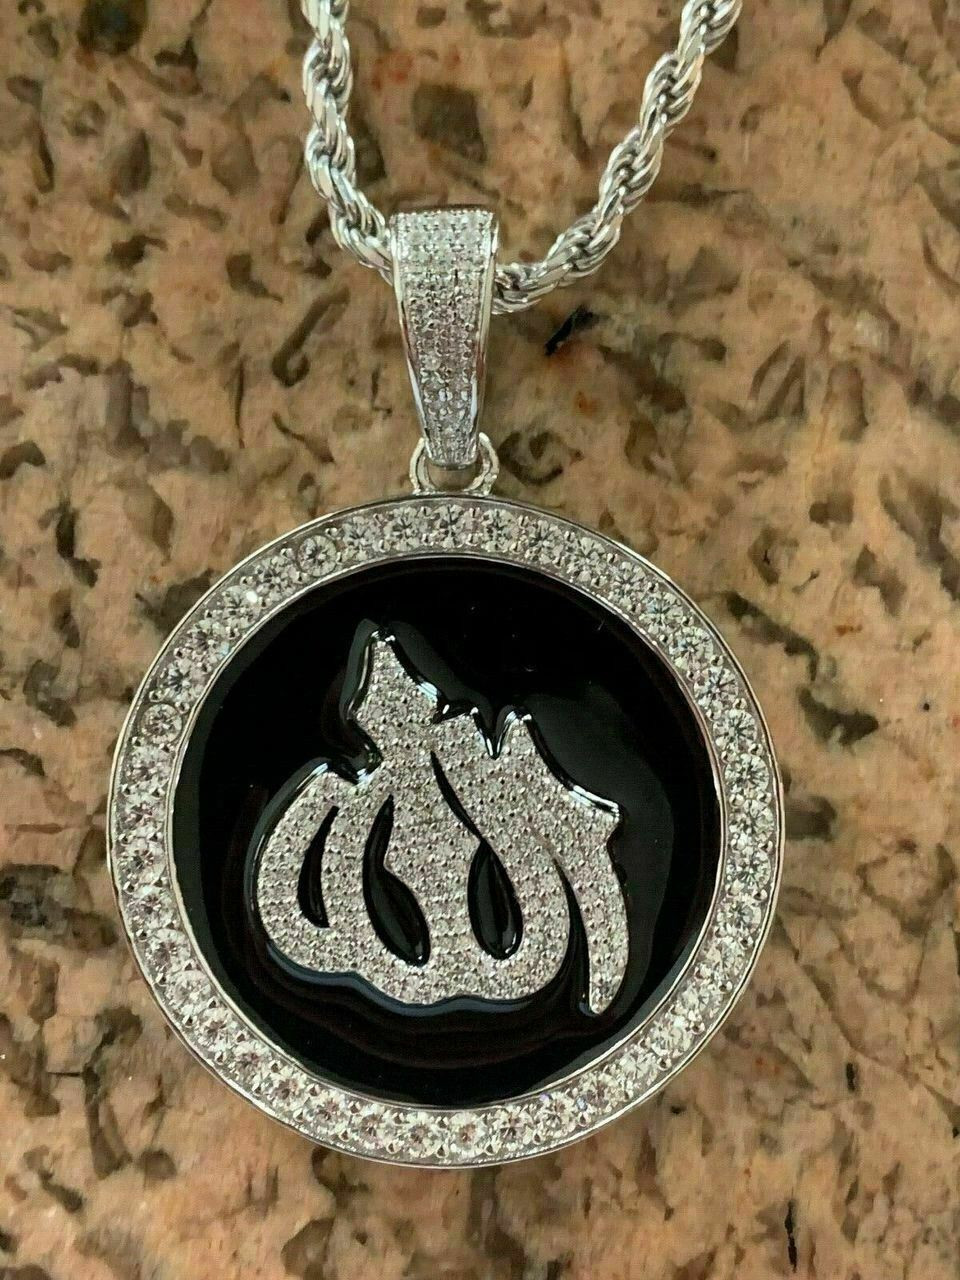 Buy M Men Style Islamic Allah Muslim Islamic Jewelry Black And Silver  Stainless Steel Pendant Necklace For Unisex SPn2022363 at Amazon.in